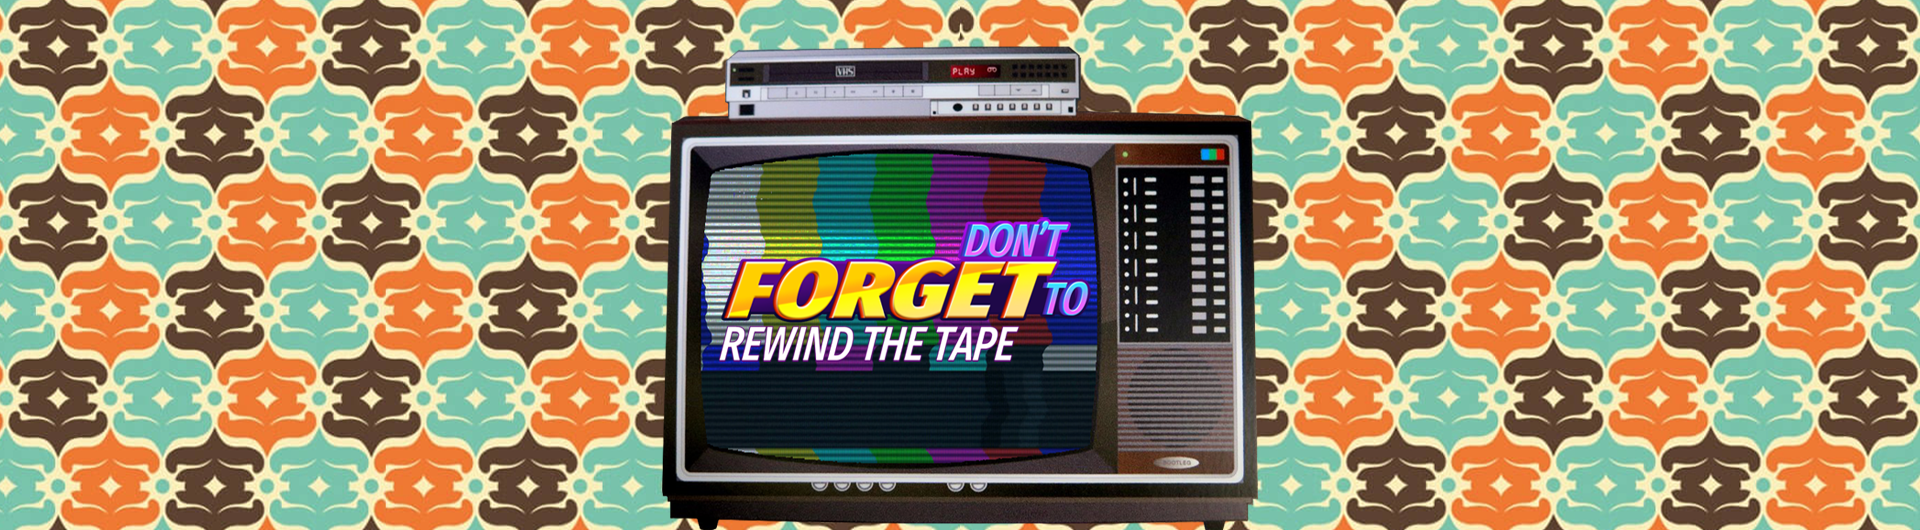 Don't forget to rewind the tape